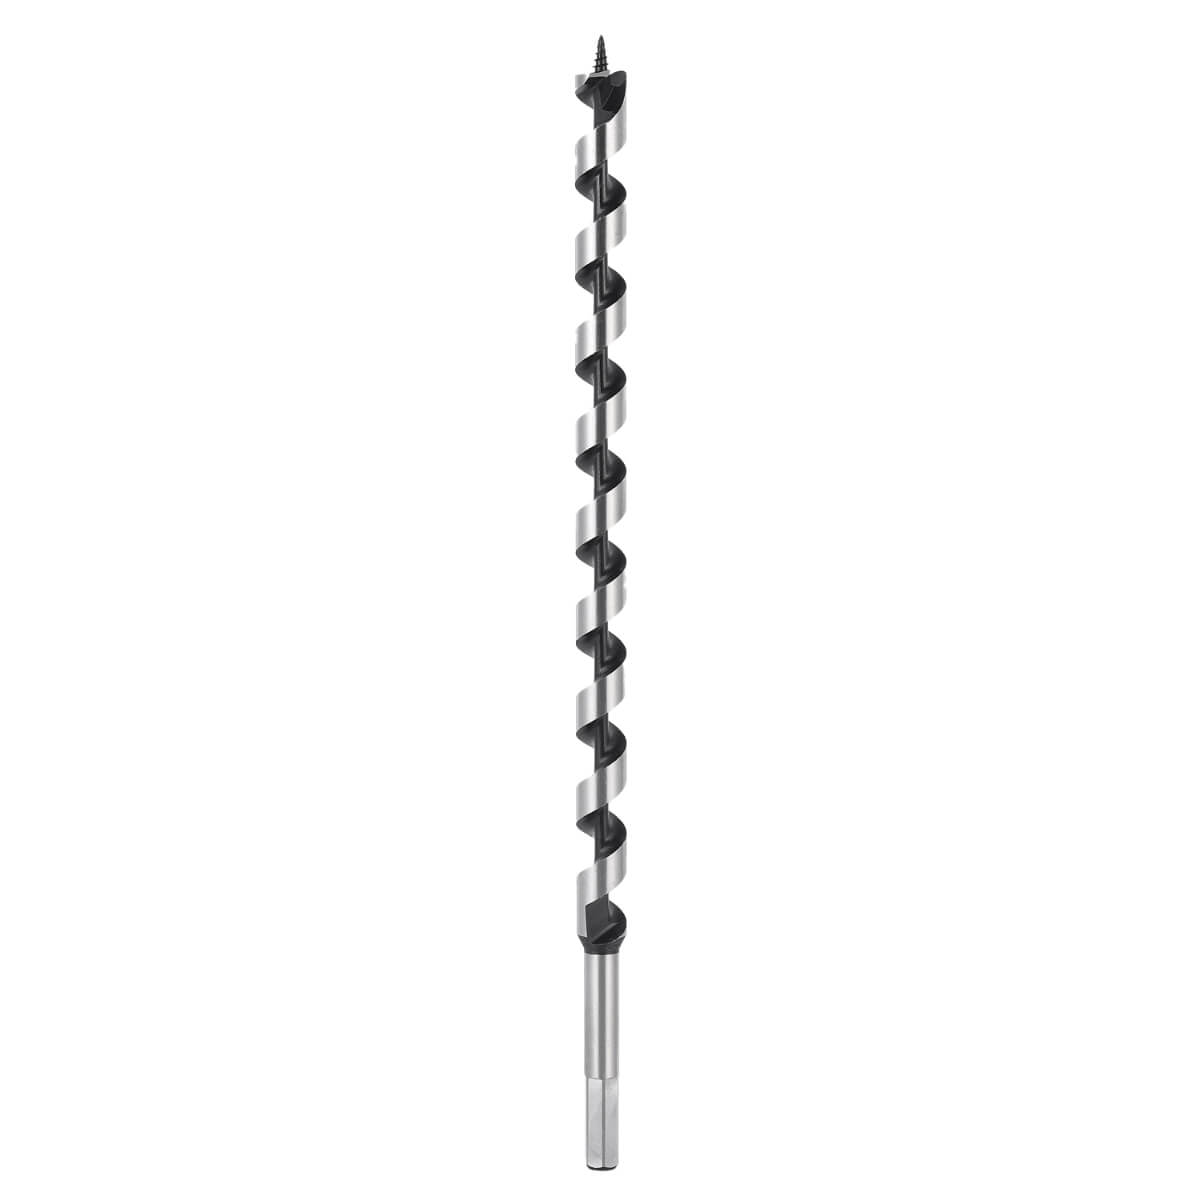 Auger Drill Bit Blcak and White Finish For Wood With Hex Shank